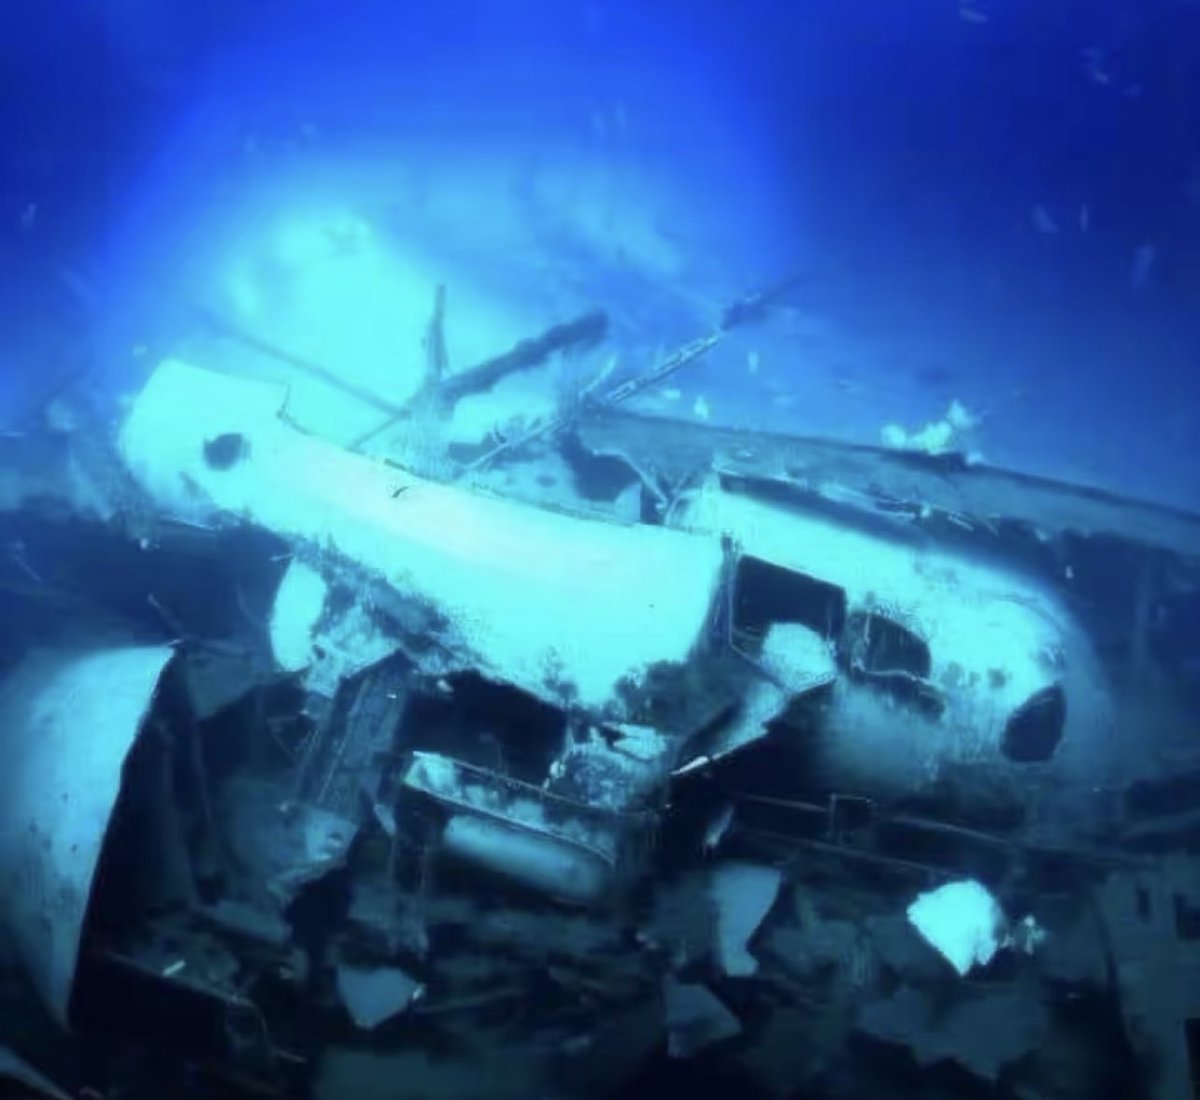 Ocean Gate’s Titan submarine in pieces at the bottom of the Atlantic Ocean after imploding due to immense pressure difference at that depth. 

The debris field was found by a Remotely Operated Vehicle, ROV.
1,500 feet (457 meters) from the bow of the Titanic wreckage.

US Coast…